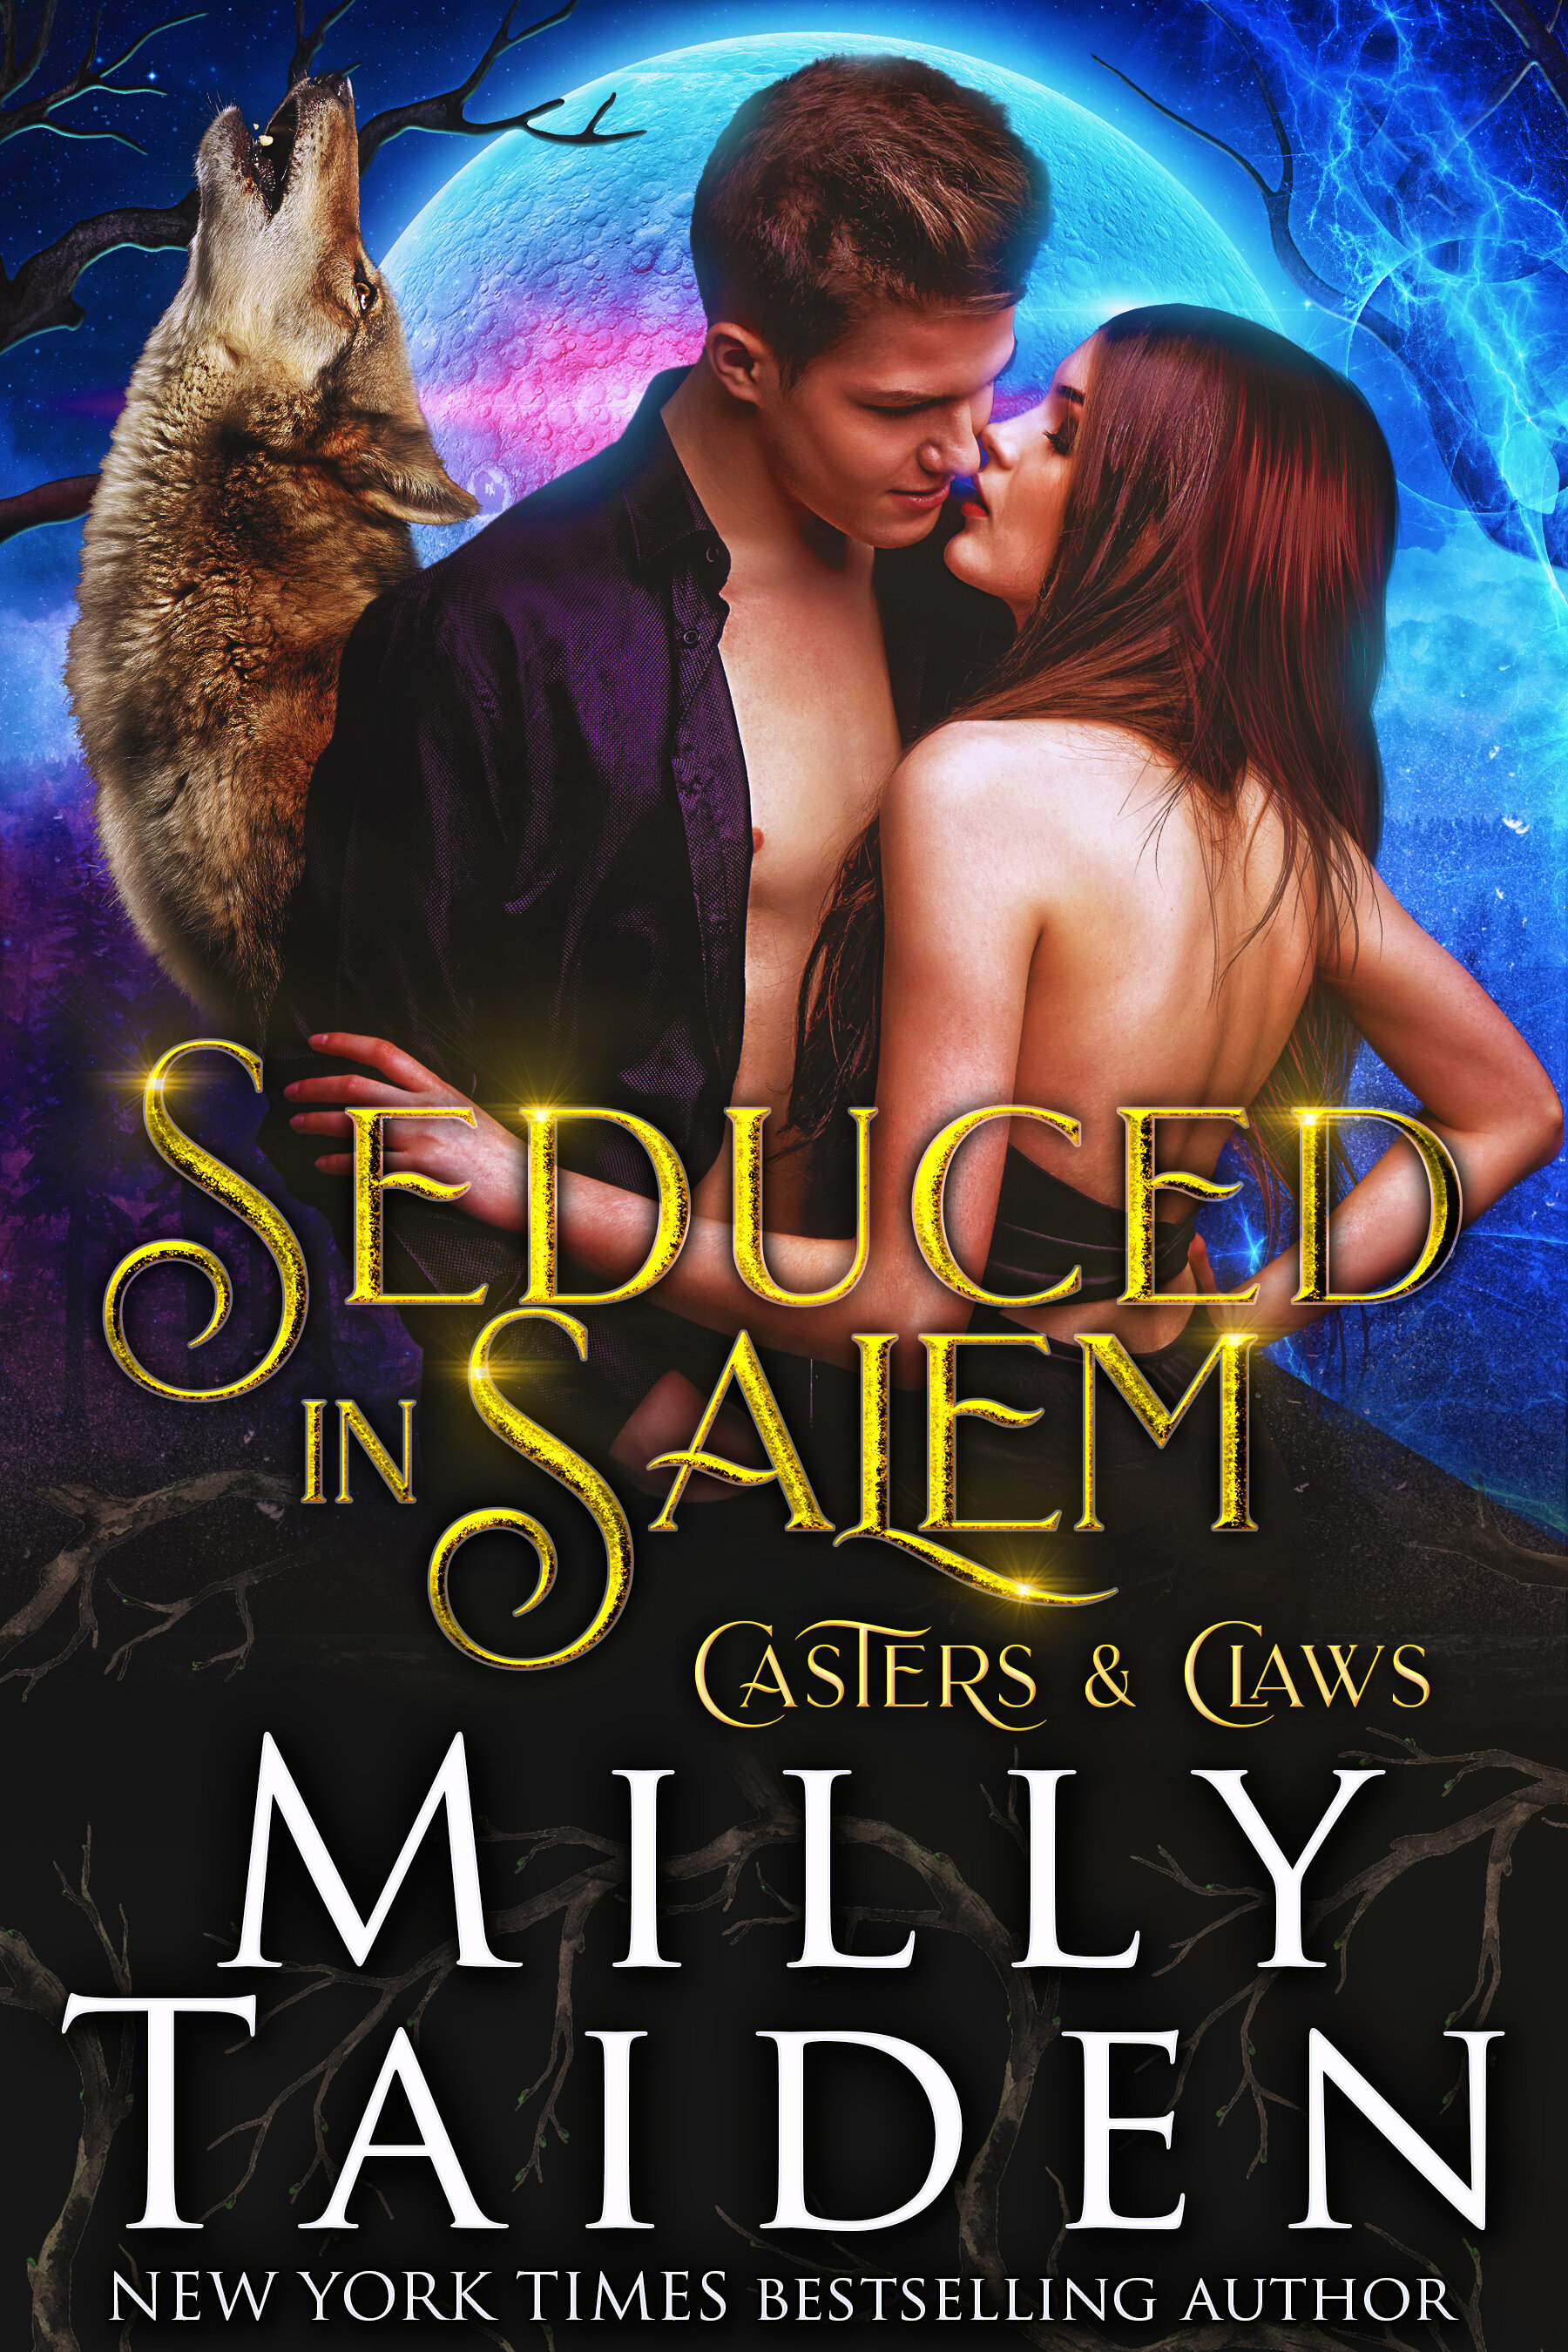 Milly Taiden - Casters & Claws - Seduced in Salem v1.jpg